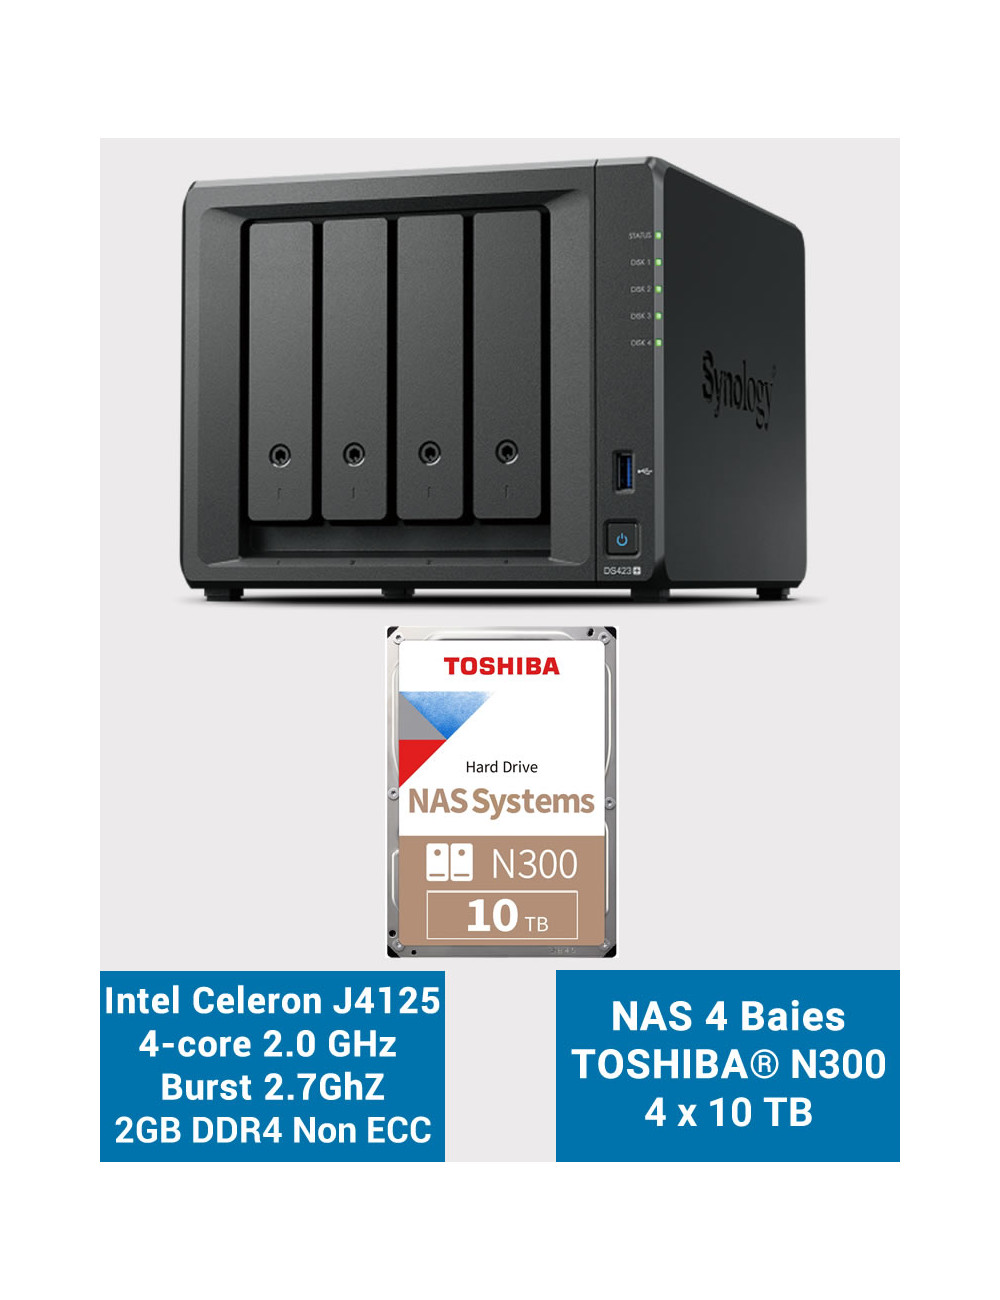 Synology DS423+ 2Go Serveur NAS Toshiba N300 40To (4x10To)